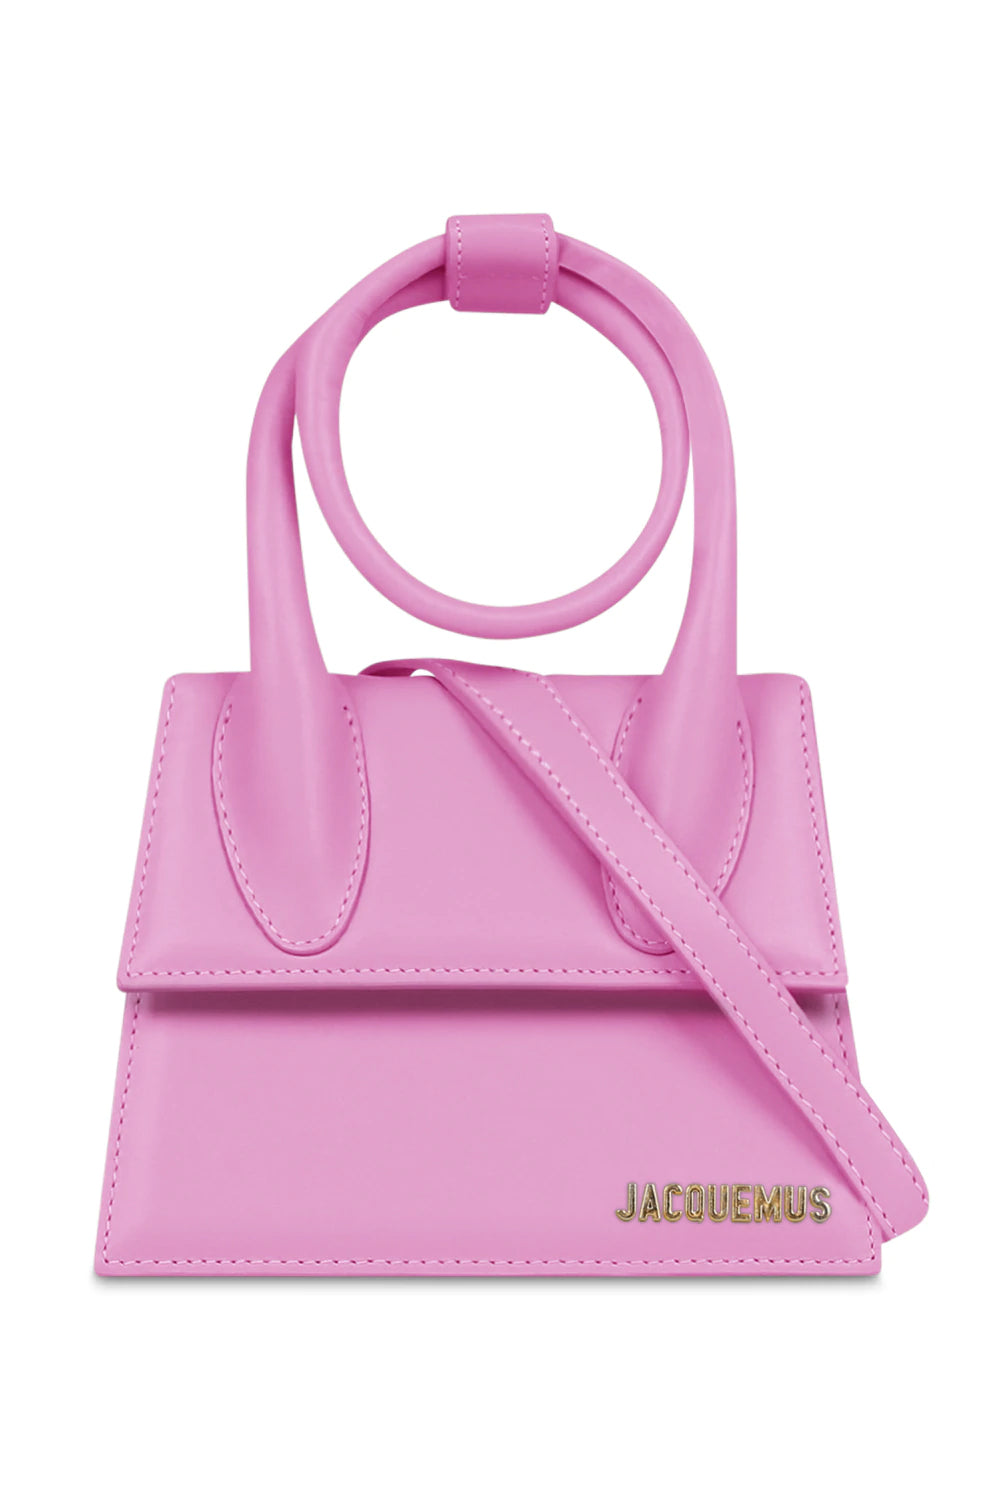 JACQUEMUS BAGS PINK LE CHIQUITO NOEUD | LIGHT PINK